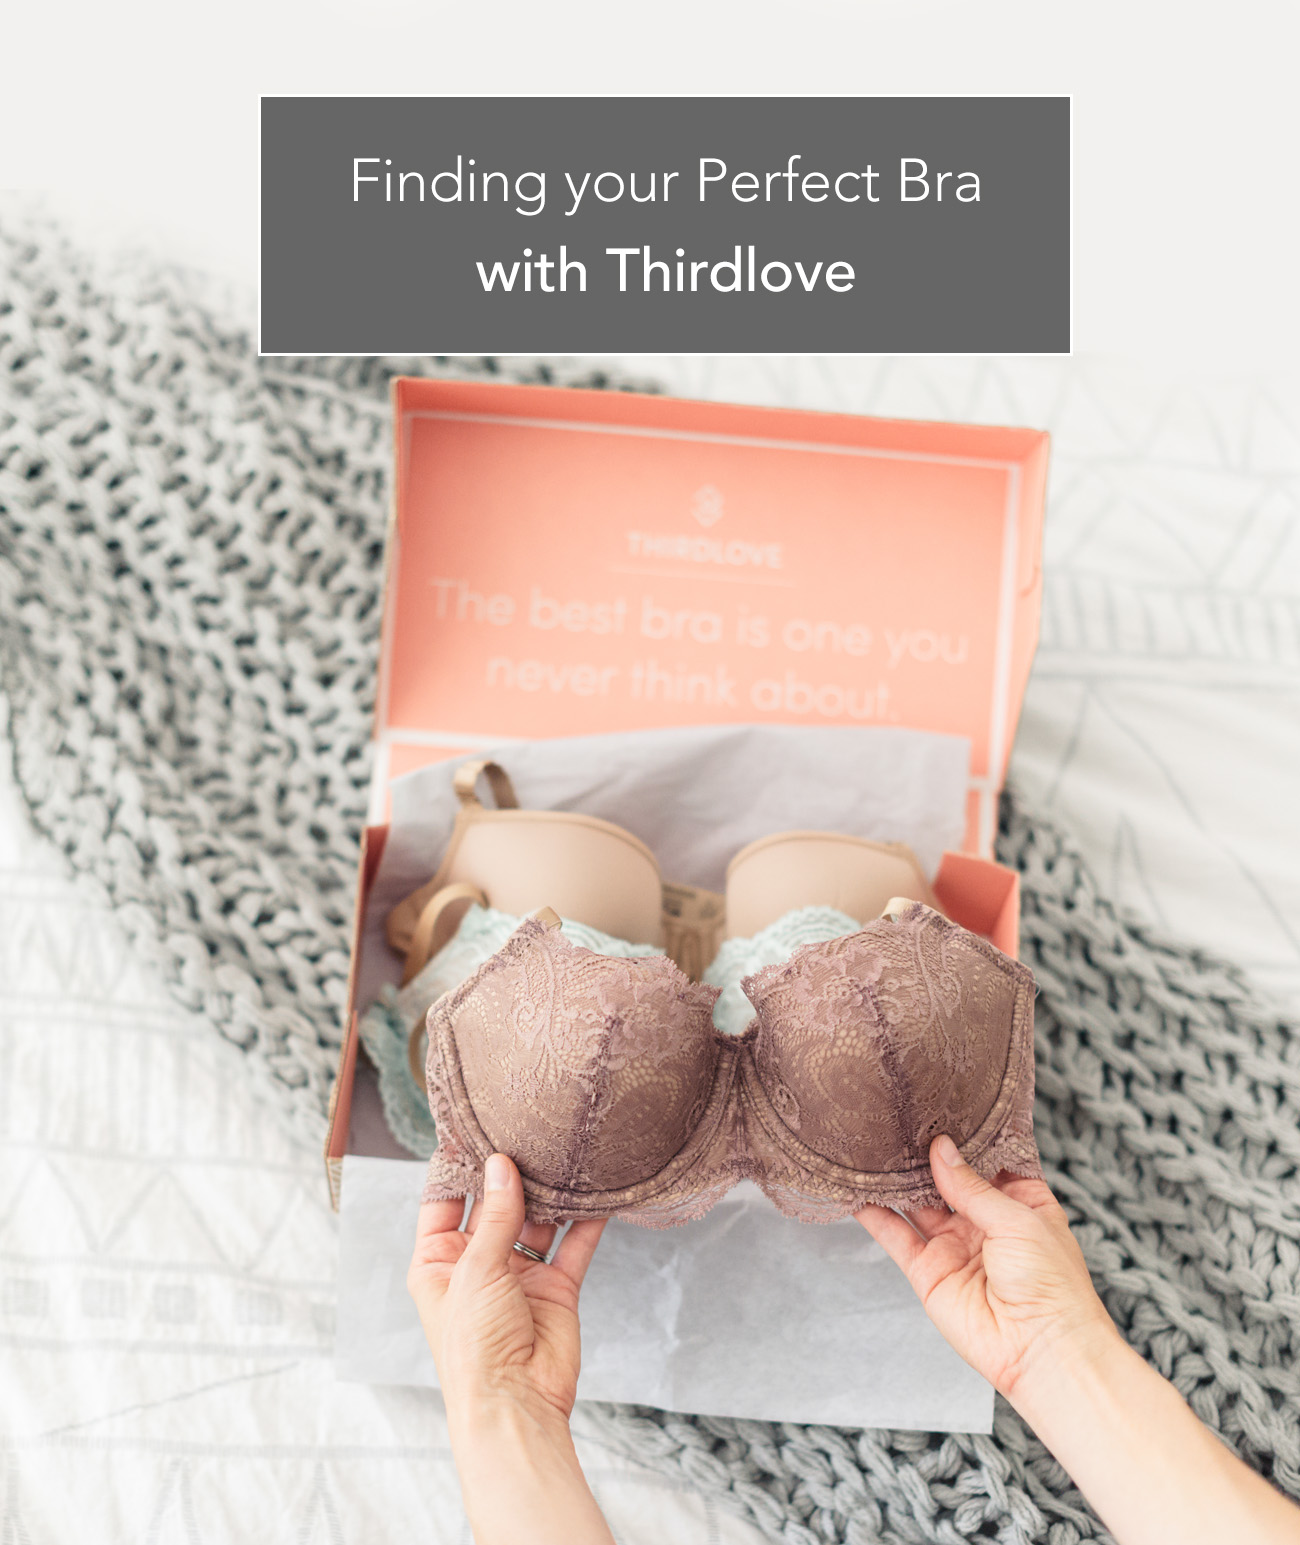 Finding the Perfect Bra with Thirdlove